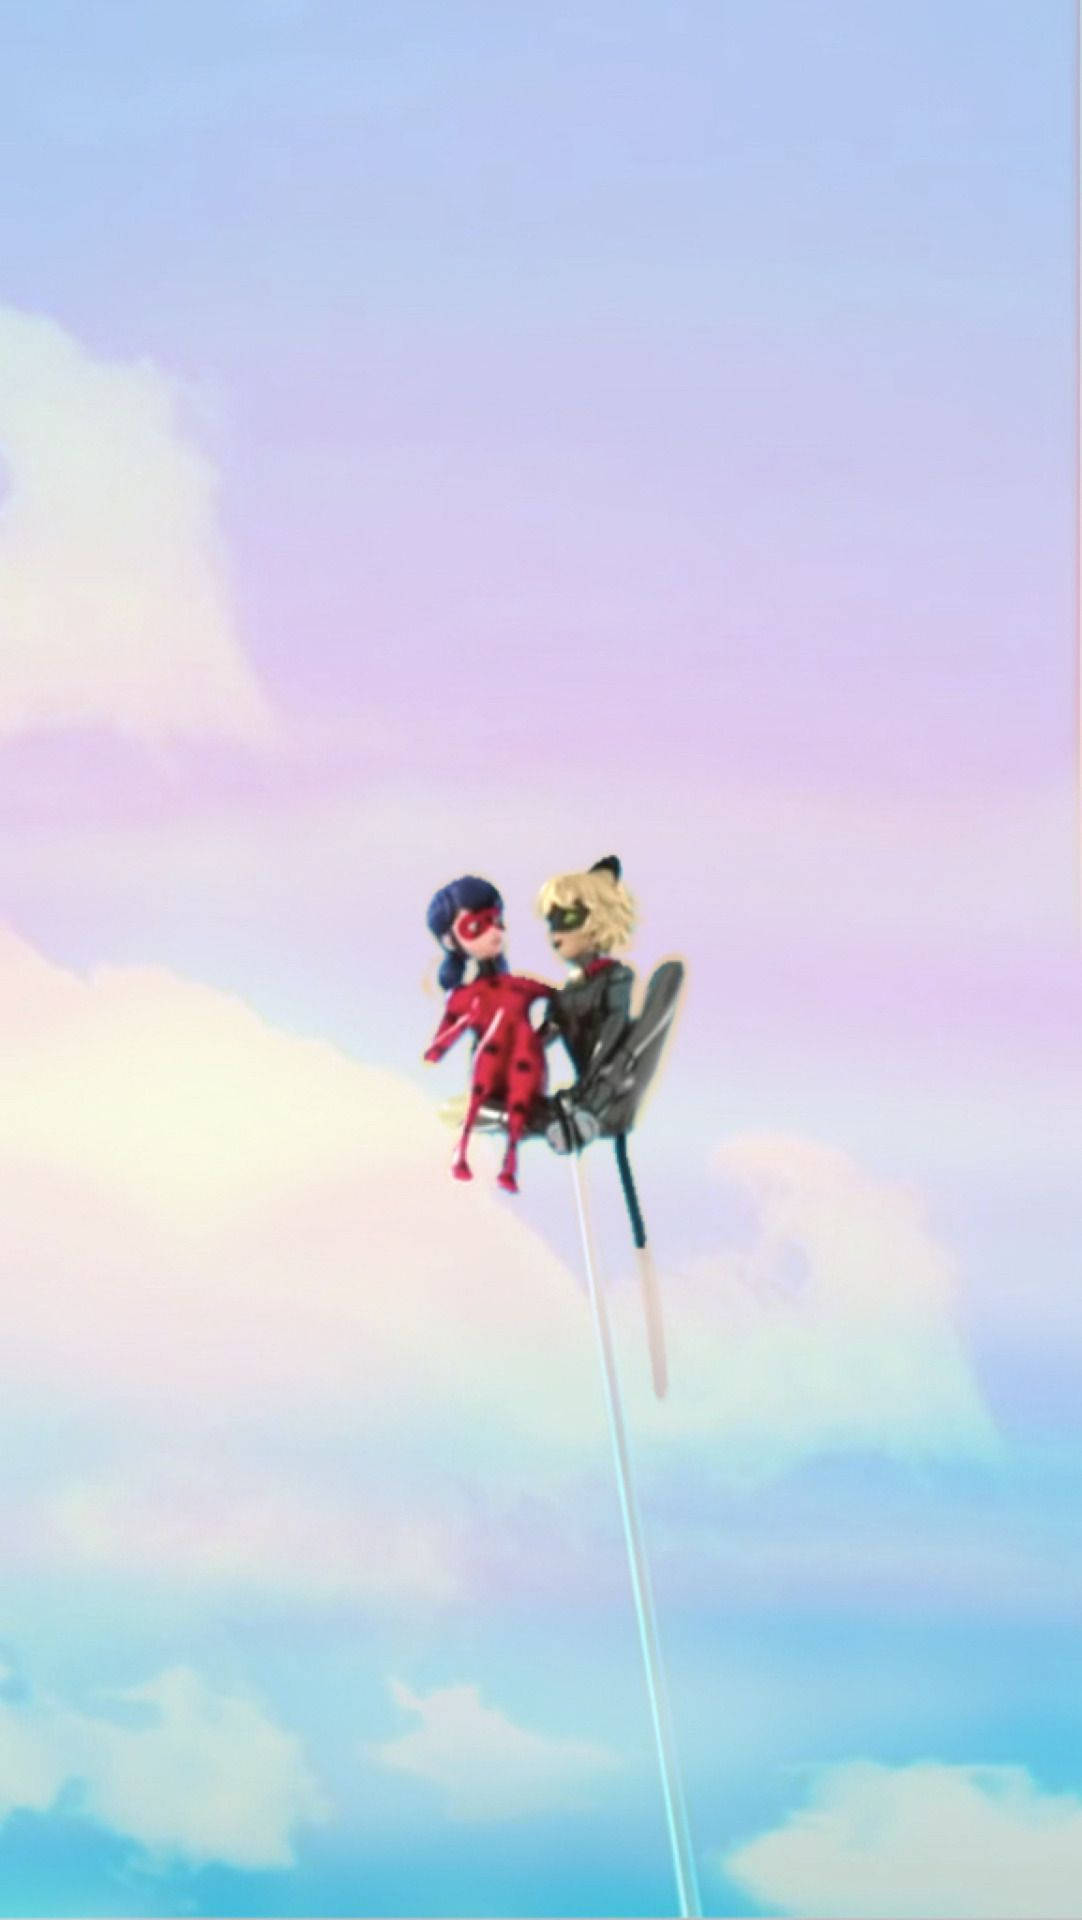 Miraculous Ladybug And Cat Noir In Air